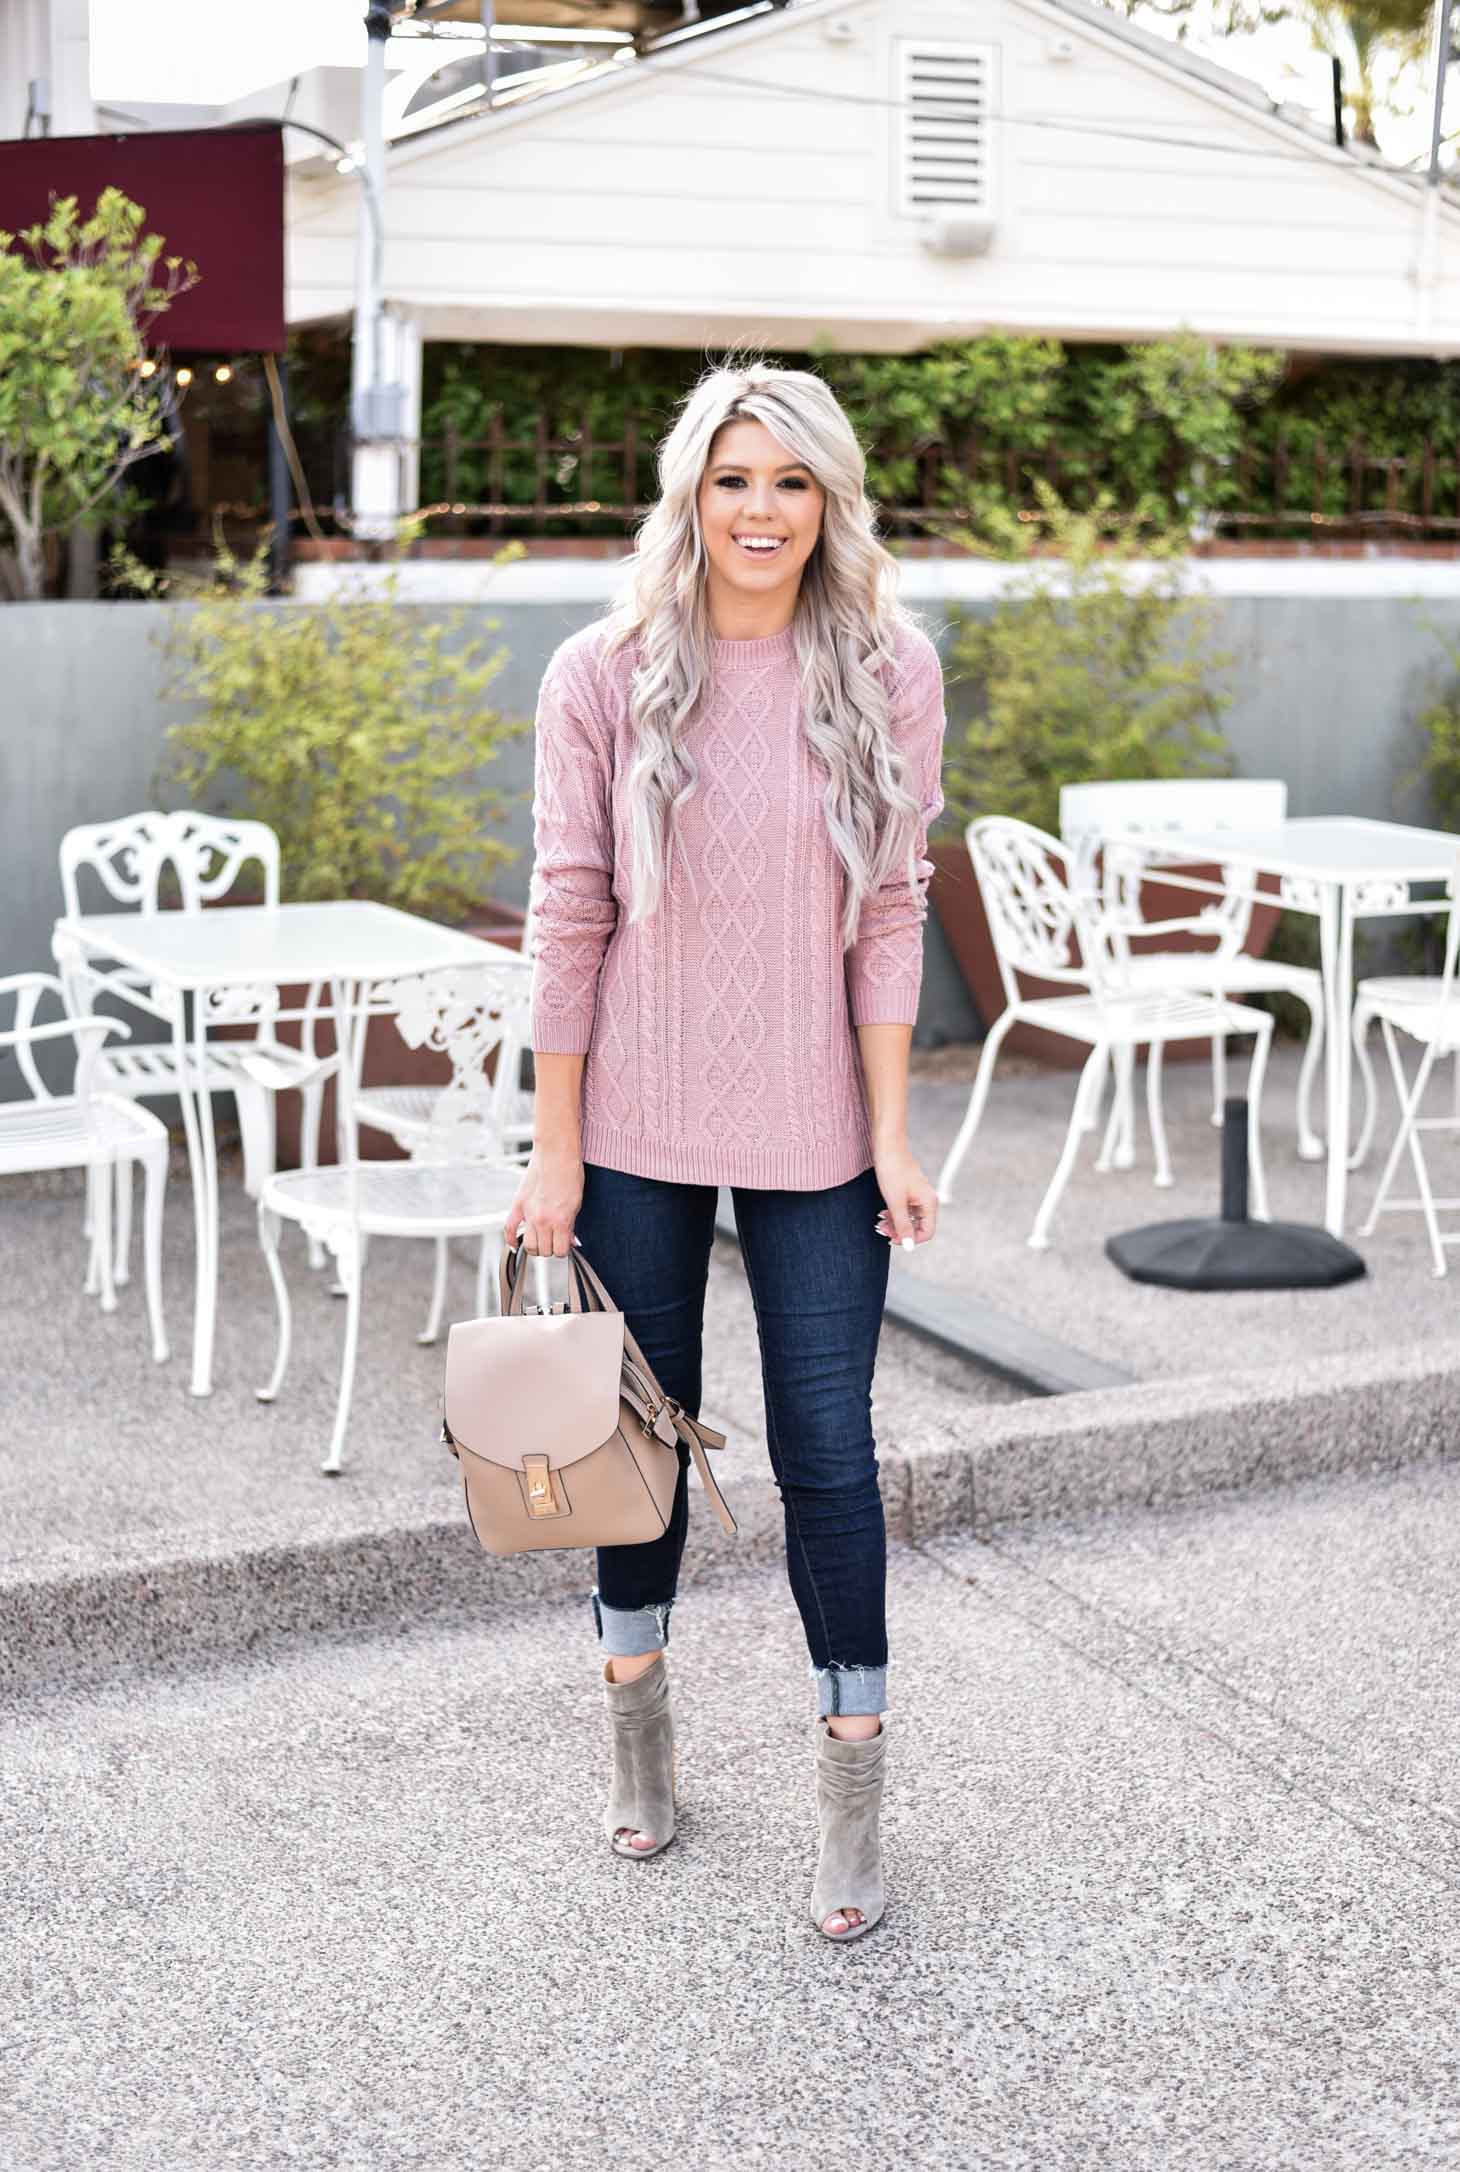 Erin Elizabeth of Wink and a Twirl shares the perfect sweater for your Fall wardrobe from Magnolia Boutique